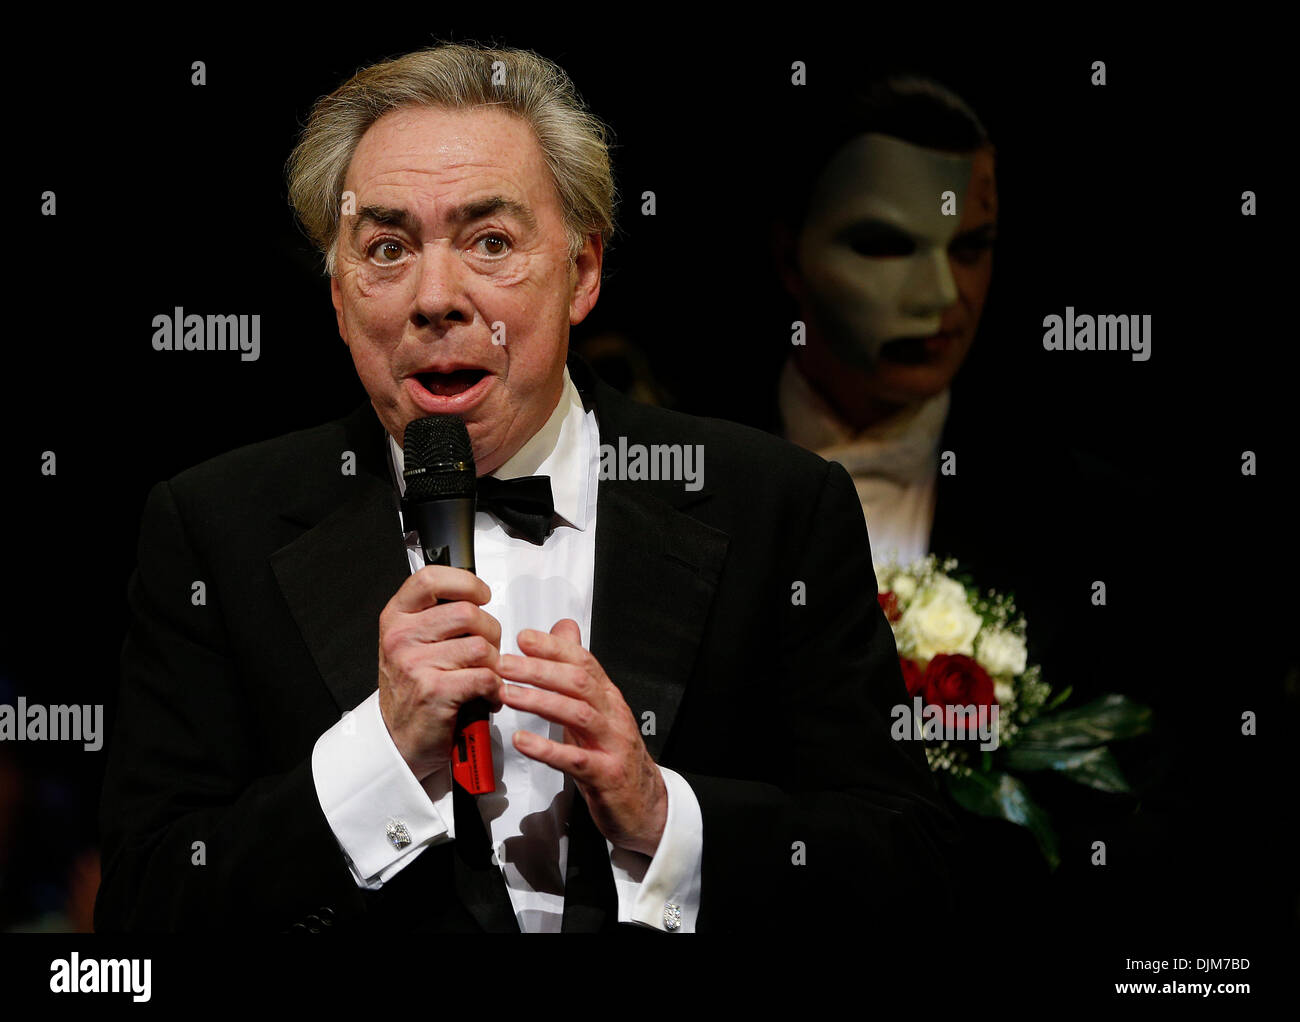 Hamburg, Germany. 28th Nov, 2013. Composer Andrew Lloyd Webber thanks the audience before the premiere of the musical 'Phantom of the Opera' in Hamburg, Germany, 28 November 2013. The musical has returned to Hamburg for ten months. Photo: Axel Heimken/dpa/Alamy Live News Stock Photo